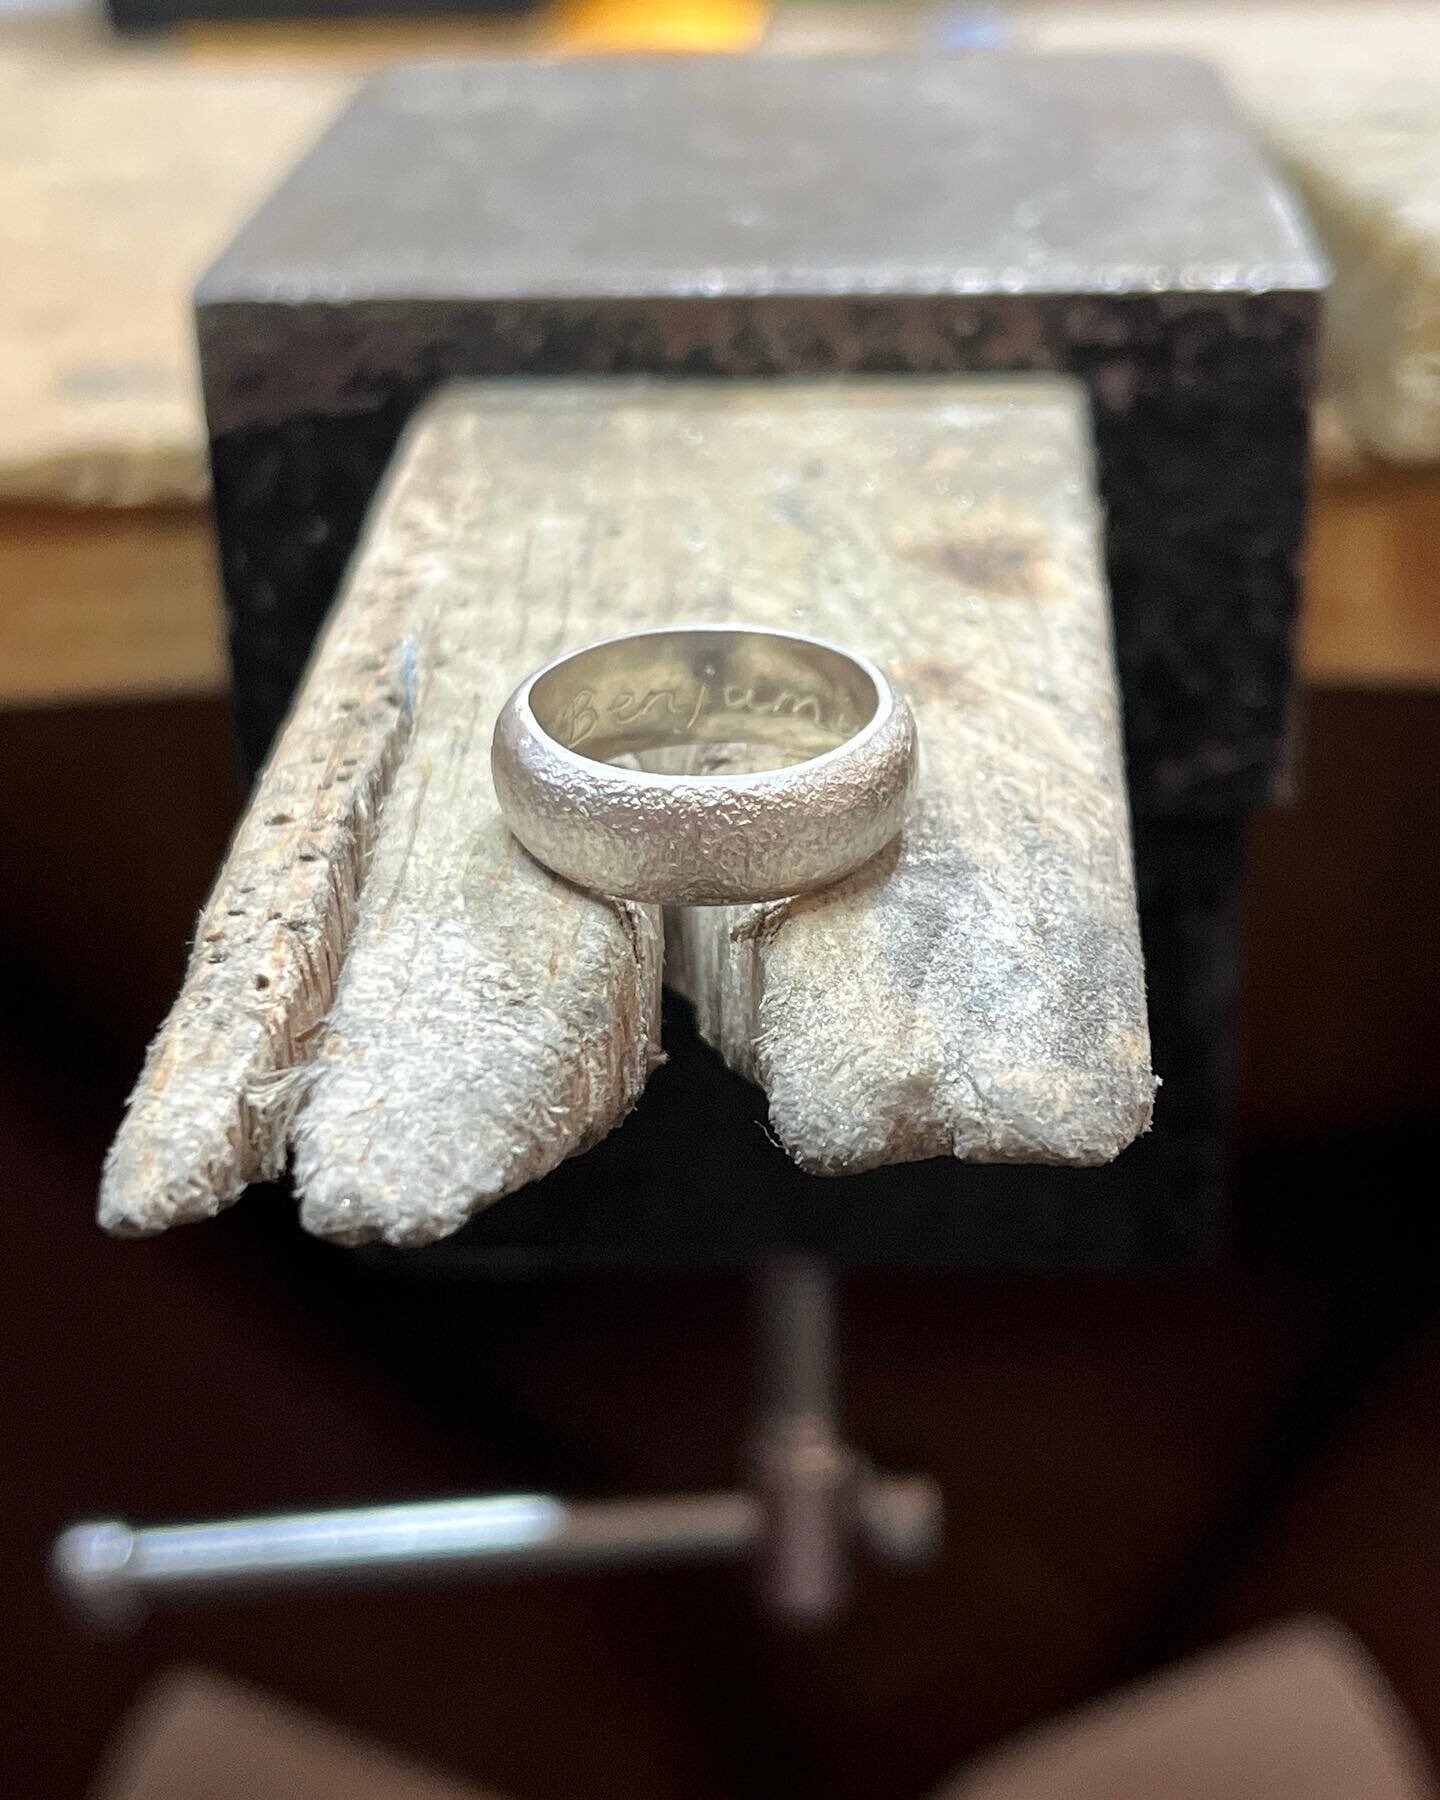 A lovely textured men&rsquo;s silver ring with engraving 👌
@winchestermakers 
#mensrings #silverrings #winchesterjeweller #bespokejewellery #hellowinchester #hampshirebusiness #giftsforhim